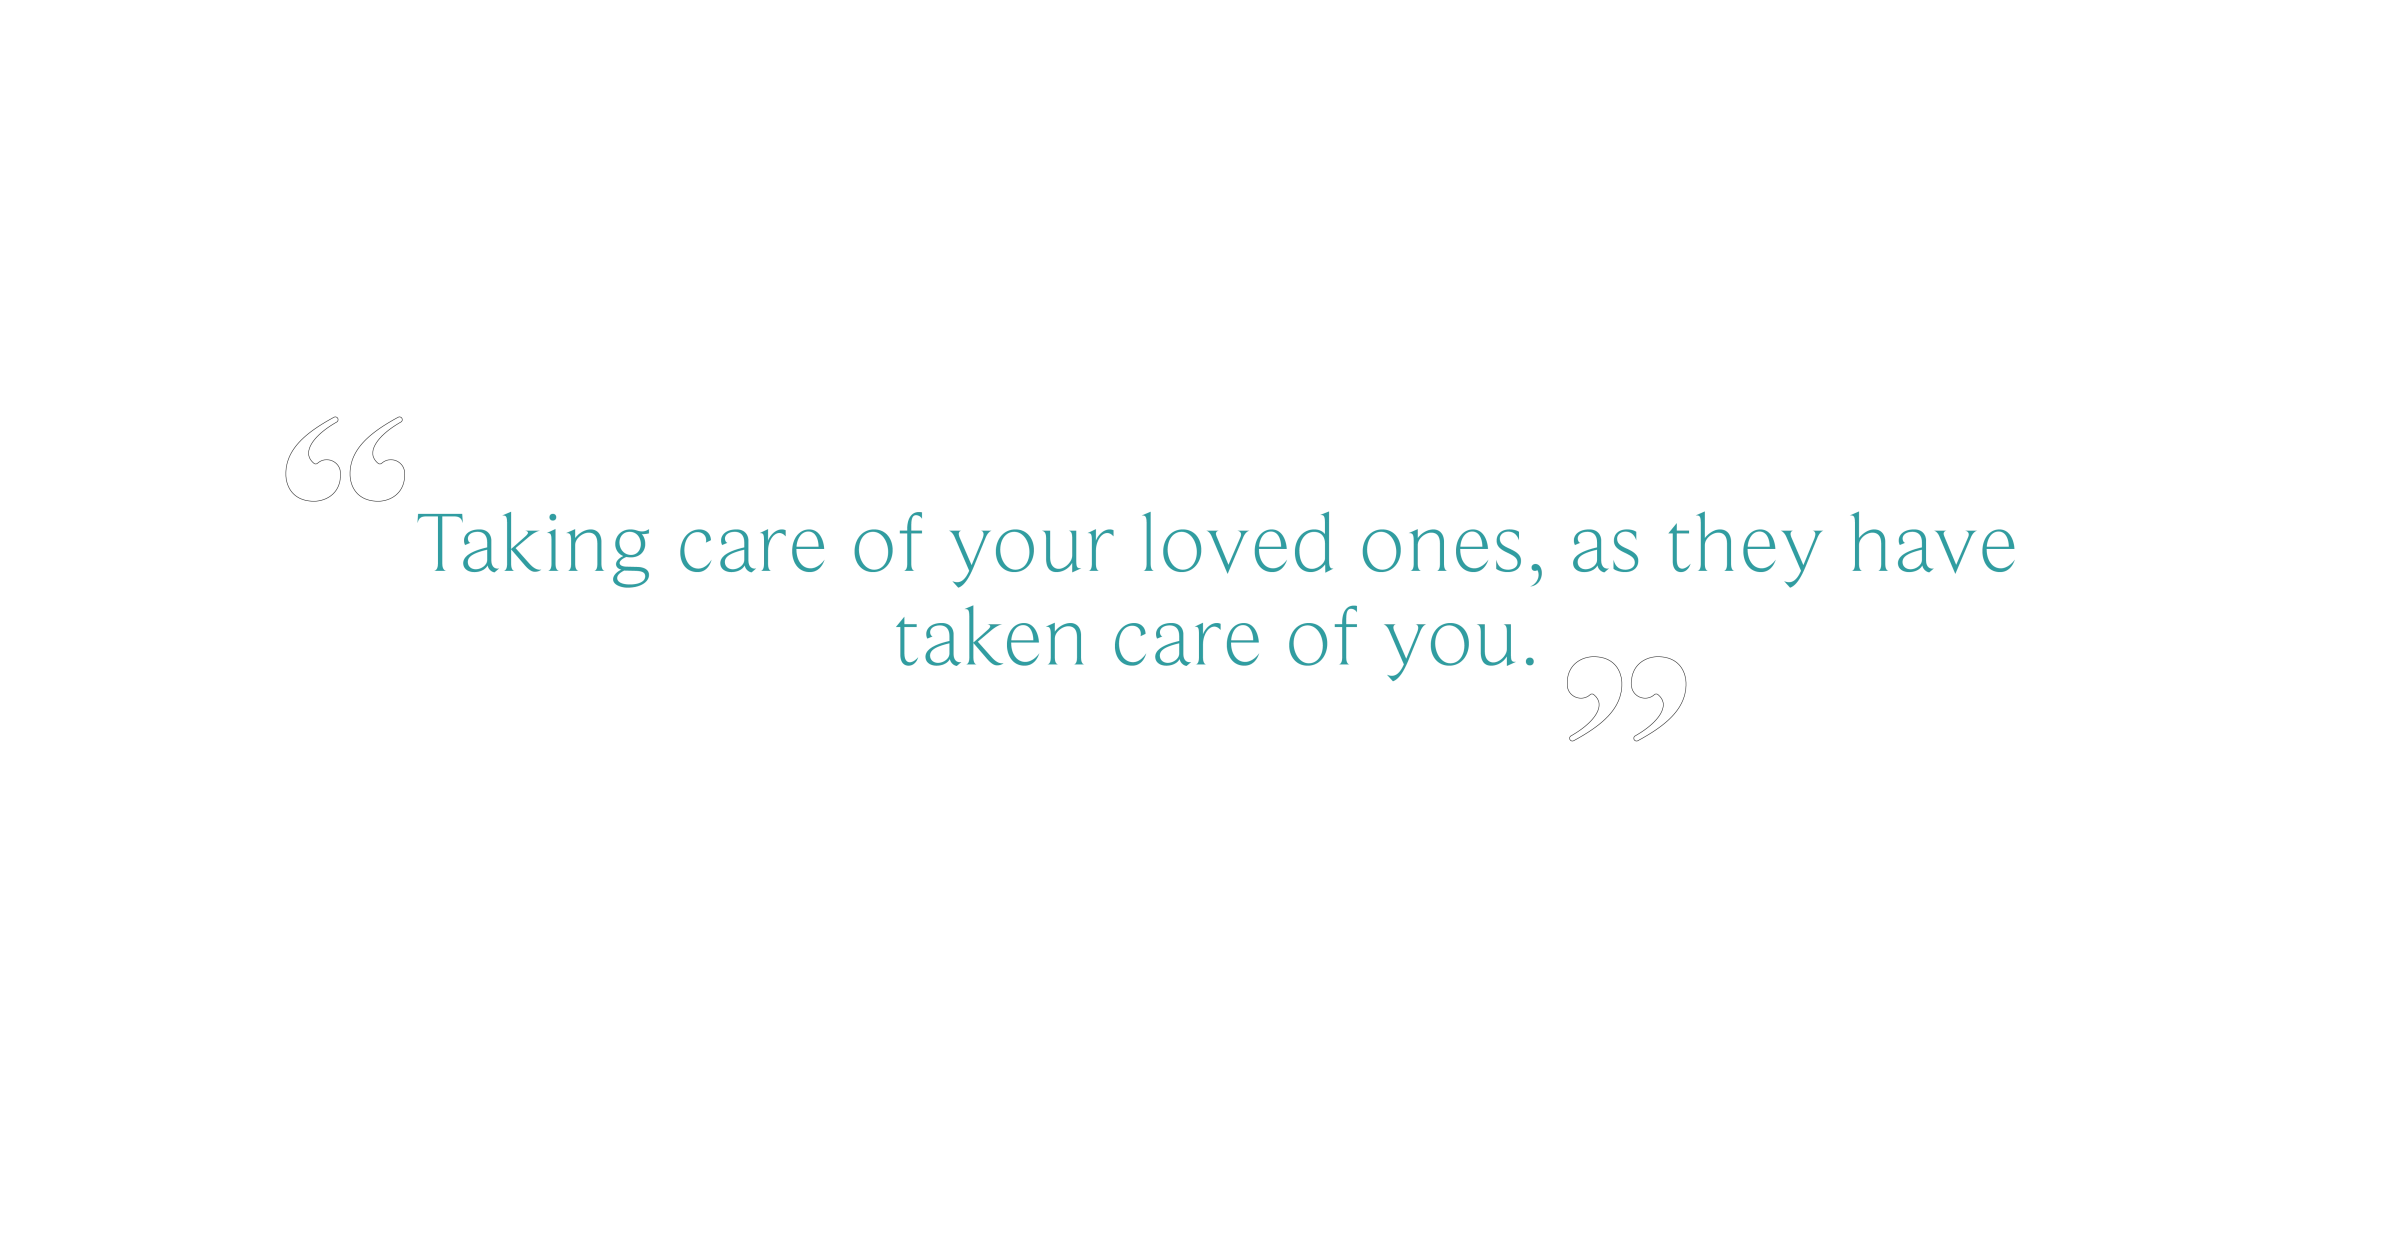 Quotation: Taking care of your loved ones as they have taken care of you